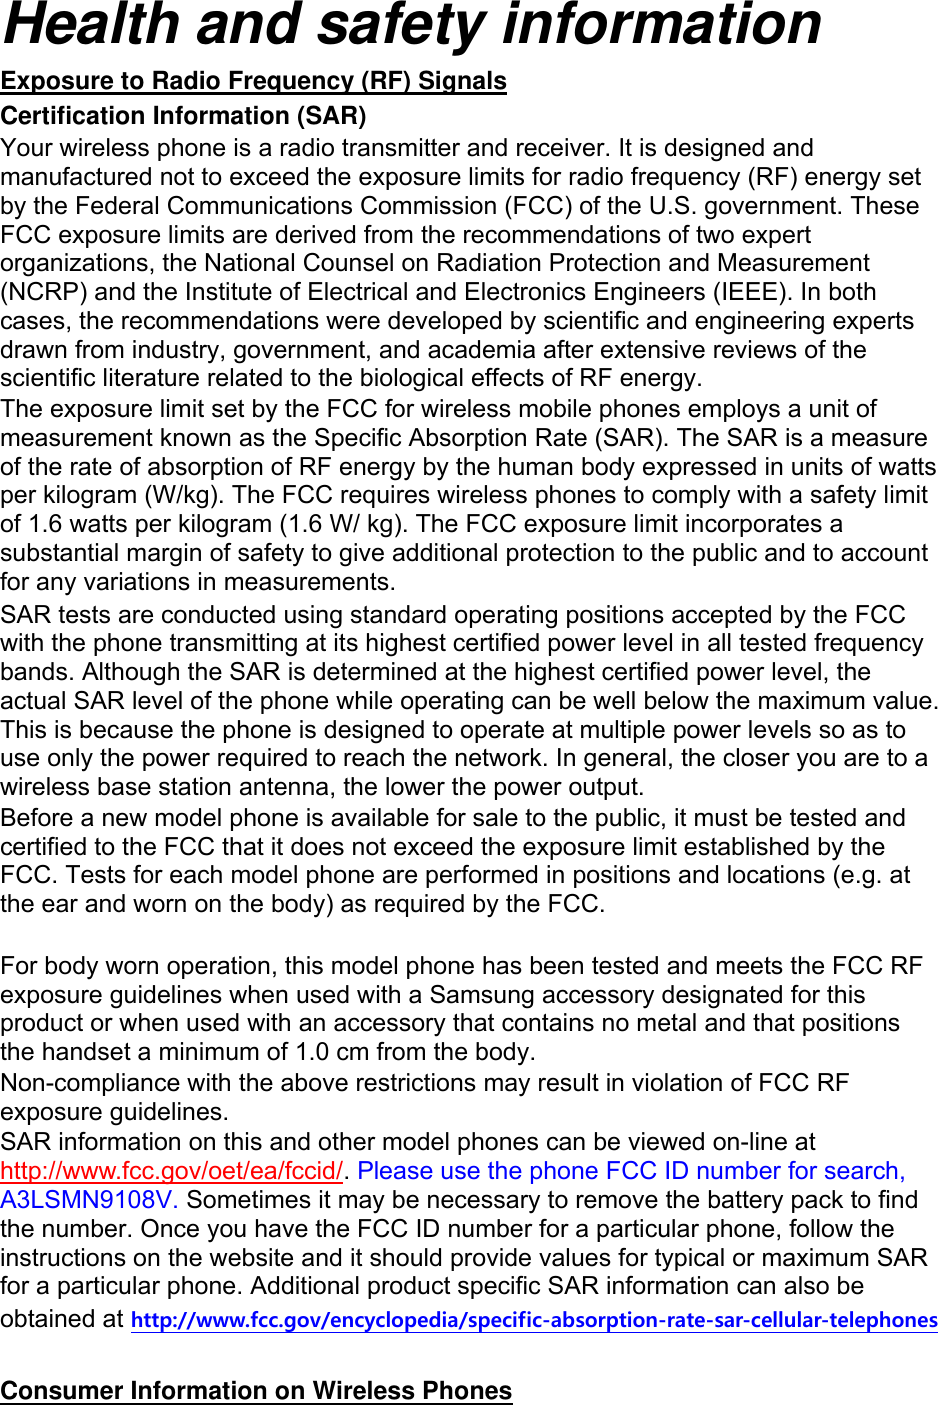 Health and safety information Exposure to Radio Frequency (RF) Signals Certification Information (SAR) Your wireless phone is a radio transmitter and receiver. It is designed and manufactured not to exceed the exposure limits for radio frequency (RF) energy set by the Federal Communications Commission (FCC) of the U.S. government. These FCC exposure limits are derived from the recommendations of two expert organizations, the National Counsel on Radiation Protection and Measurement (NCRP) and the Institute of Electrical and Electronics Engineers (IEEE). In both cases, the recommendations were developed by scientific and engineering experts drawn from industry, government, and academia after extensive reviews of the scientific literature related to the biological effects of RF energy. The exposure limit set by the FCC for wireless mobile phones employs a unit of measurement known as the Specific Absorption Rate (SAR). The SAR is a measure of the rate of absorption of RF energy by the human body expressed in units of watts per kilogram (W/kg). The FCC requires wireless phones to comply with a safety limit of 1.6 watts per kilogram (1.6 W/ kg). The FCC exposure limit incorporates a substantial margin of safety to give additional protection to the public and to account for any variations in measurements. SAR tests are conducted using standard operating positions accepted by the FCC with the phone transmitting at its highest certified power level in all tested frequency bands. Although the SAR is determined at the highest certified power level, the actual SAR level of the phone while operating can be well below the maximum value. This is because the phone is designed to operate at multiple power levels so as to use only the power required to reach the network. In general, the closer you are to a wireless base station antenna, the lower the power output. Before a new model phone is available for sale to the public, it must be tested and certified to the FCC that it does not exceed the exposure limit established by the FCC. Tests for each model phone are performed in positions and locations (e.g. at the ear and worn on the body) as required by the FCC.      For body worn operation, this model phone has been tested and meets the FCC RF exposure guidelines when used with a Samsung accessory designated for this product or when used with an accessory that contains no metal and that positions the handset a minimum of 1.0 cm from the body.   Non-compliance with the above restrictions may result in violation of FCC RF exposure guidelines. SAR information on this and other model phones can be viewed on-line at http://www.fcc.gov/oet/ea/fccid/. Please use the phone FCC ID number for search, A3LSMN9108V. Sometimes it may be necessary to remove the battery pack to find the number. Once you have the FCC ID number for a particular phone, follow the instructions on the website and it should provide values for typical or maximum SAR for a particular phone. Additional product specific SAR information can also be obtained at http://www.fcc.gov/encyclopedia/specific-absorption-rate-sar-cellular-telephones  Consumer Information on Wireless Phones 